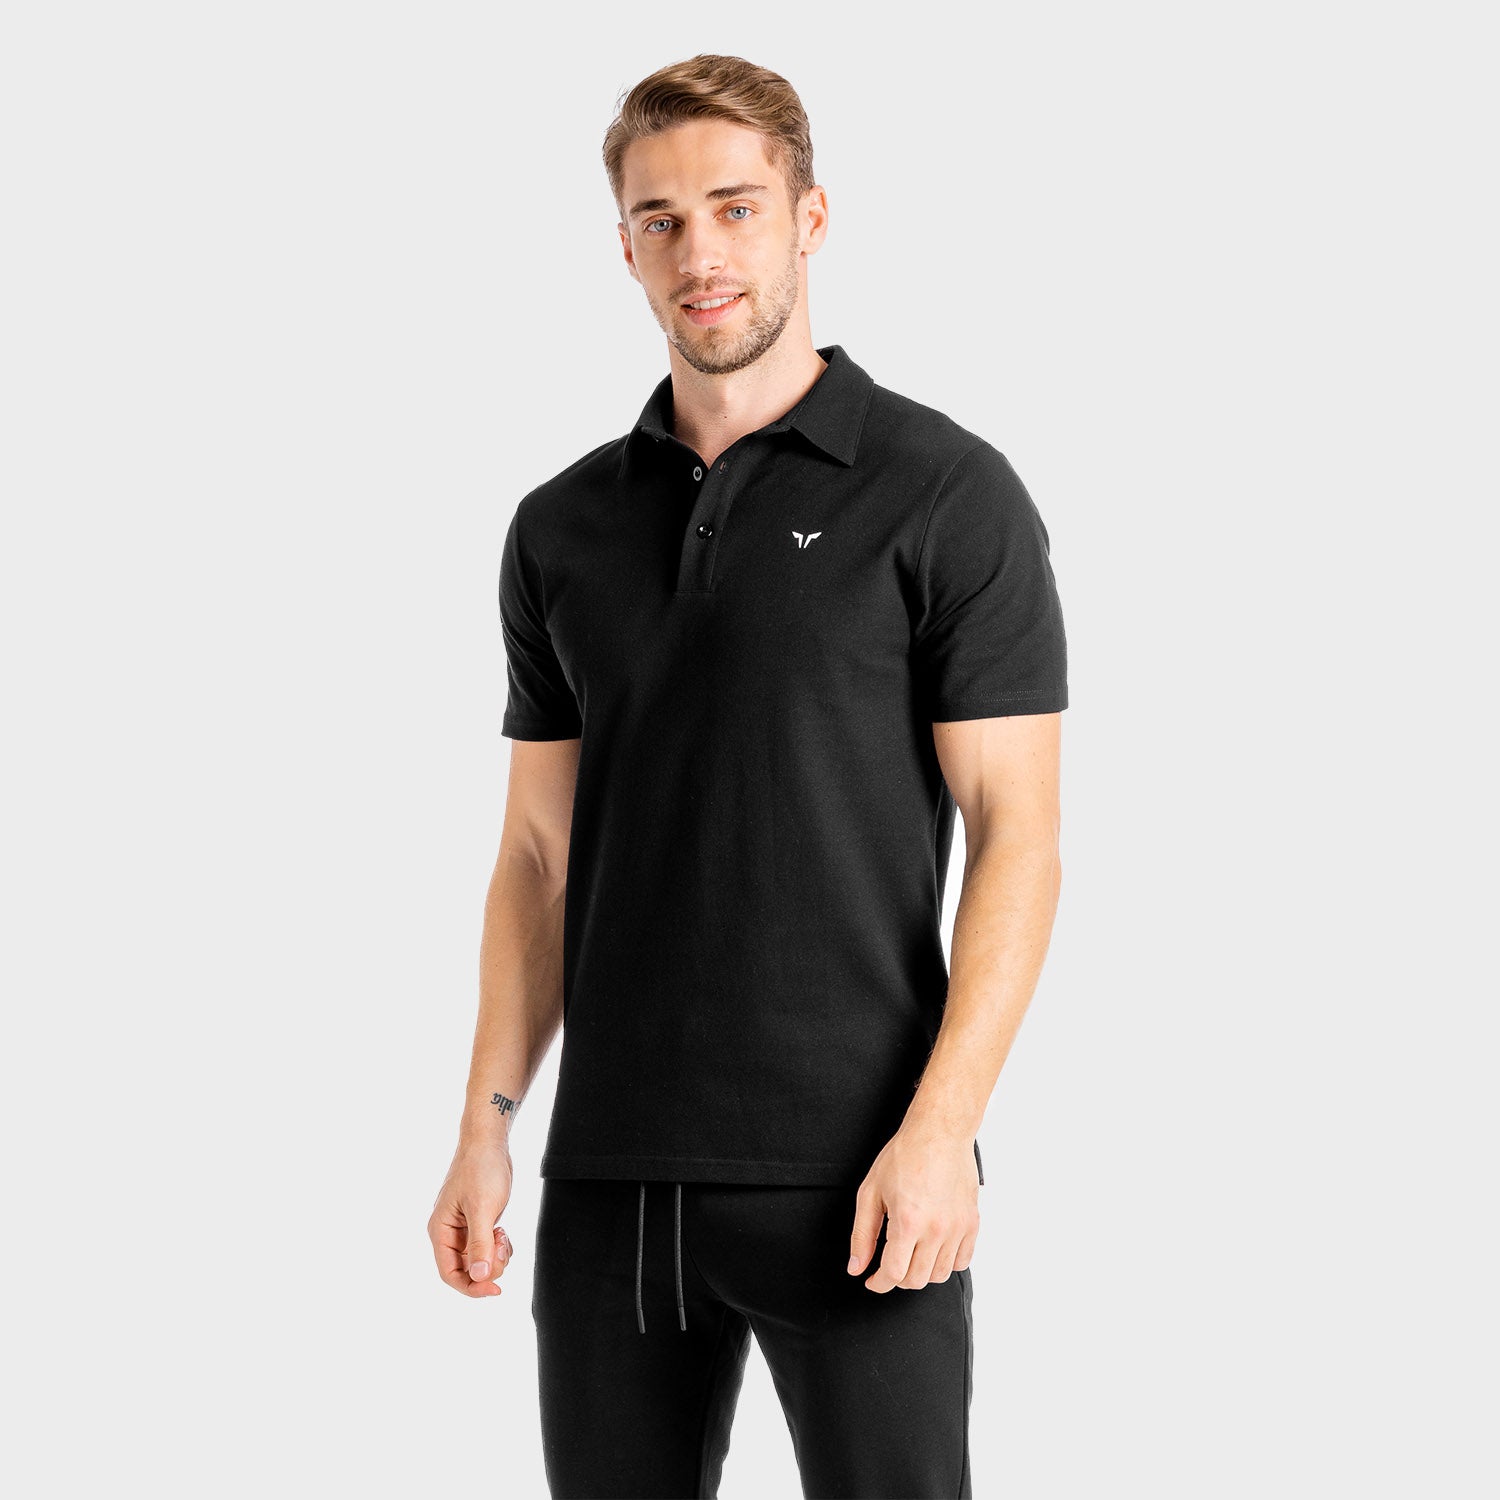 SQUATWOLF-gym-wear-core-tee-polo-black-workout-shirts-for-men